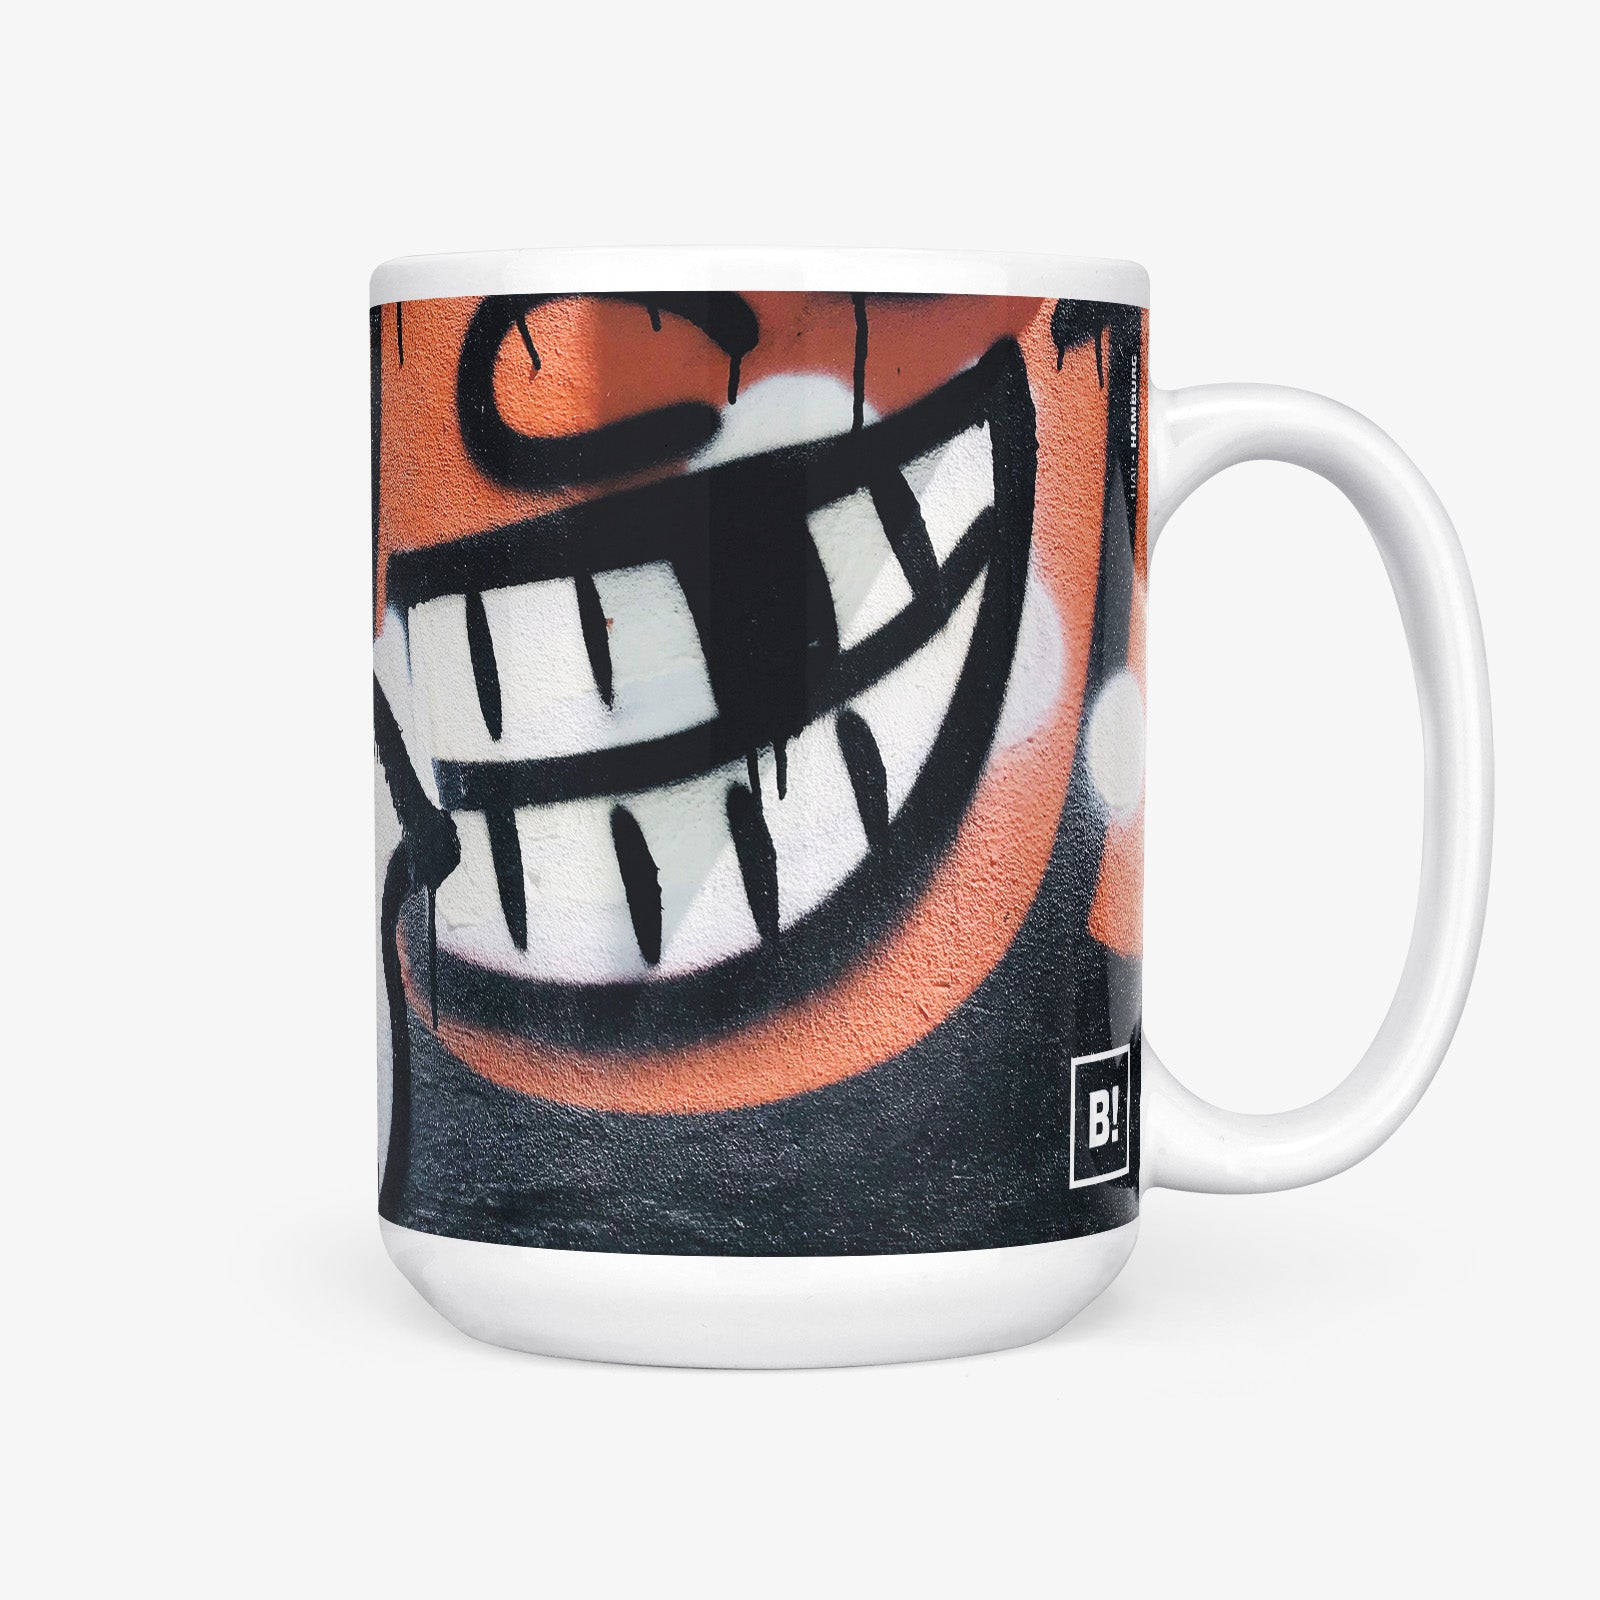 Be inspired by our Urban Art Coffee Mug "HA!" from Hamburg. This mug features an 15oz size with the handle on the right.